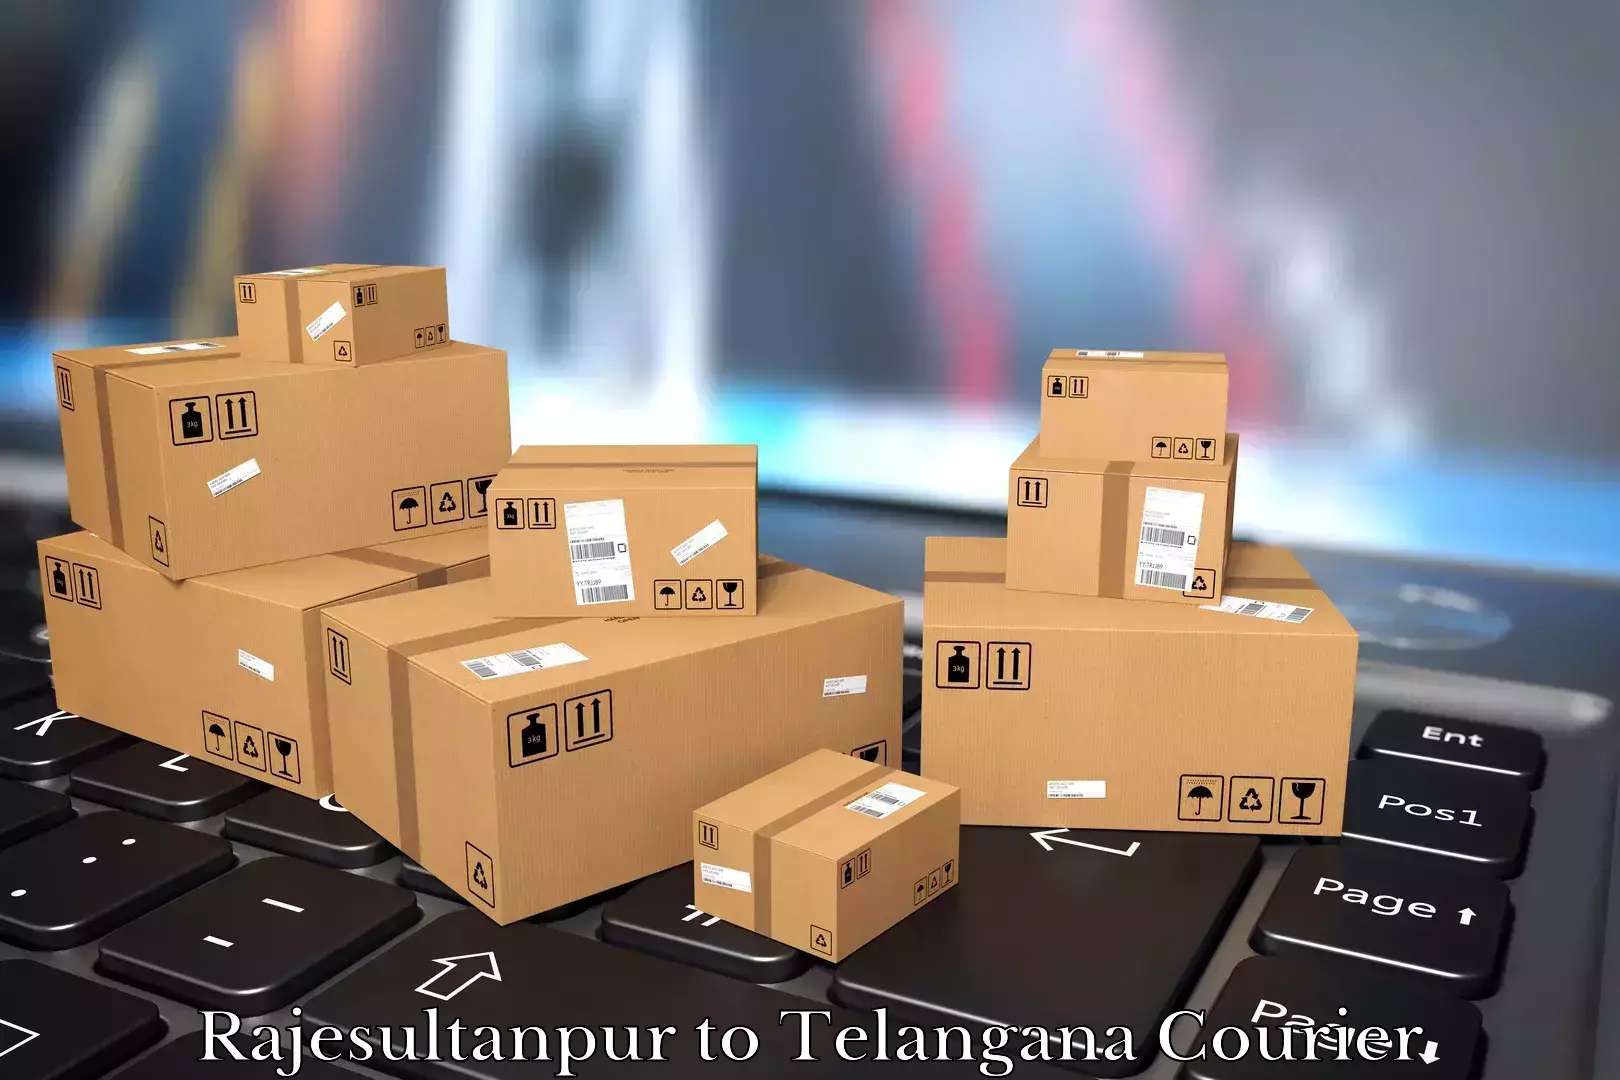 Furniture moving specialists Rajesultanpur to Manopad